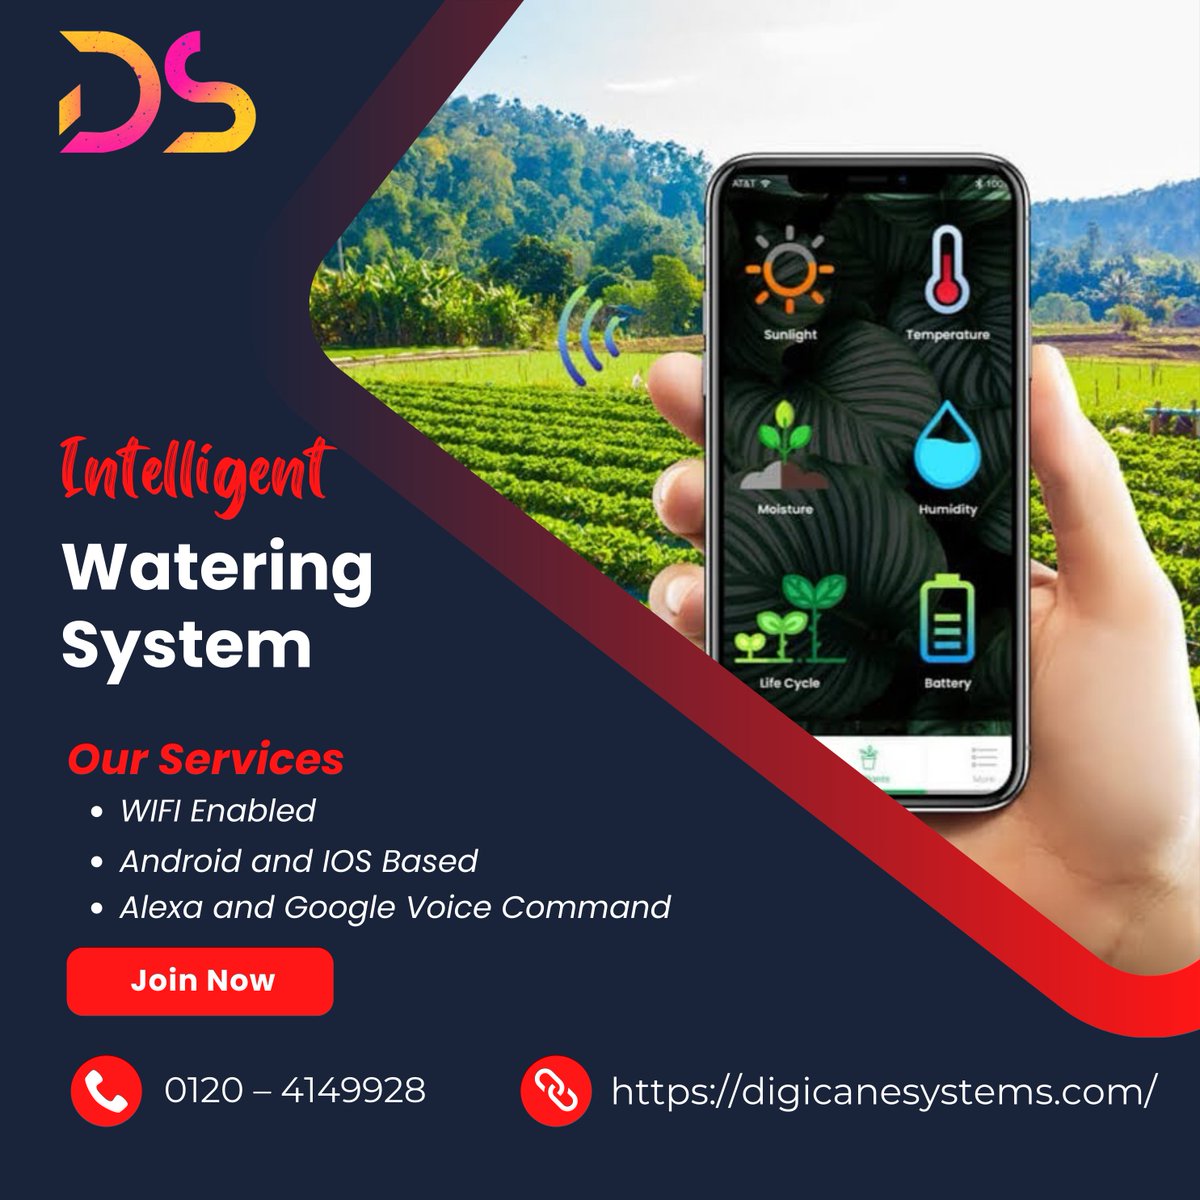 Experience the future of gardening with Digicane Systems' smart watering system. Our IoT-enabled solution takes the guesswork out of irrigation.
#SmartWatering #IoT #DigicaneSystems #GardeningTech #WaterEfficiency #SmartWatering #GreenThumb #PlantCare #SmartIrrigation